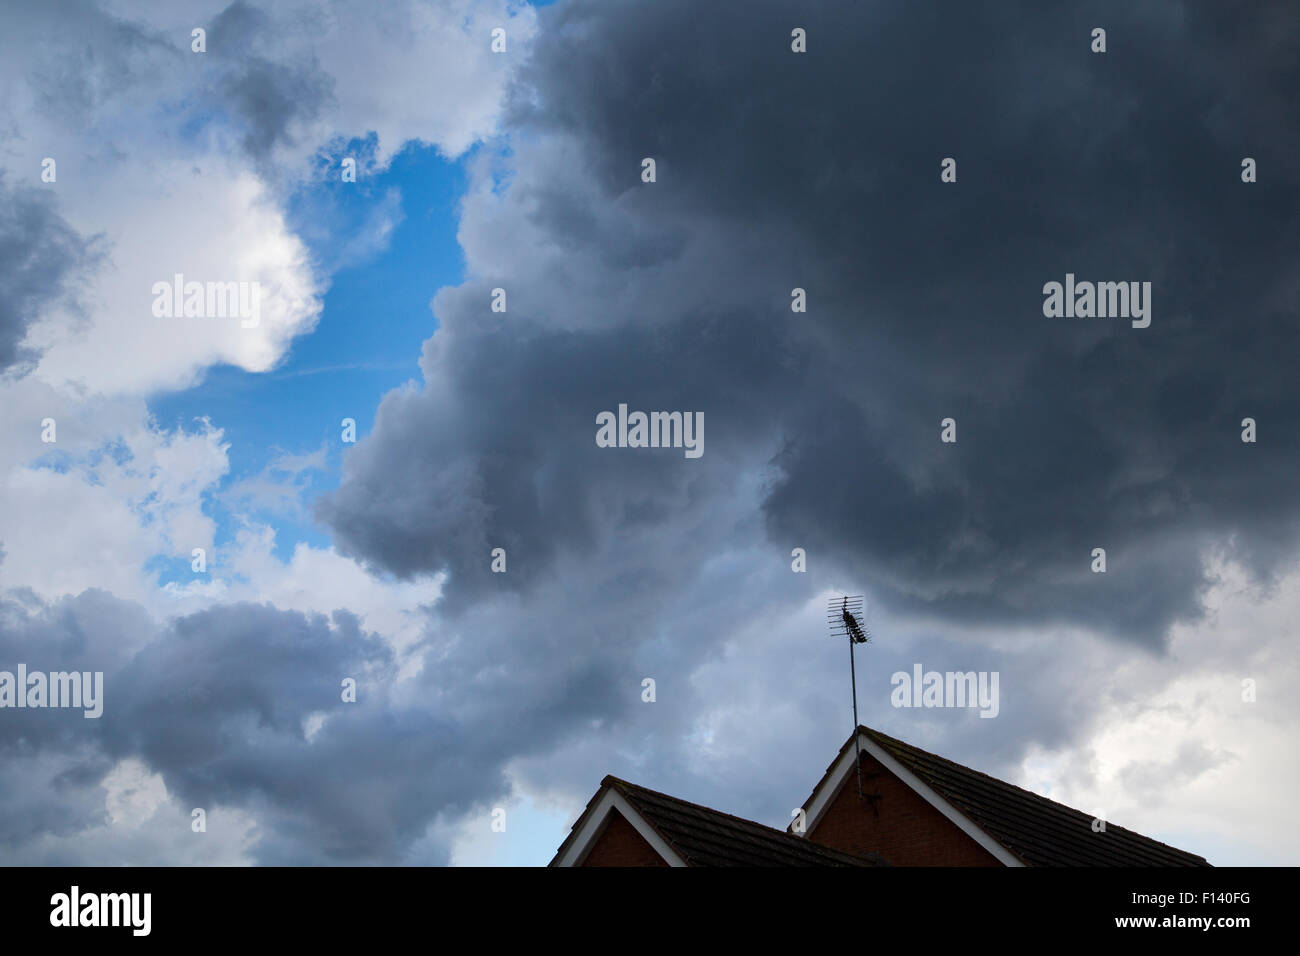 Storm clouds above a roof with a television aerial in the UK Stock Photo